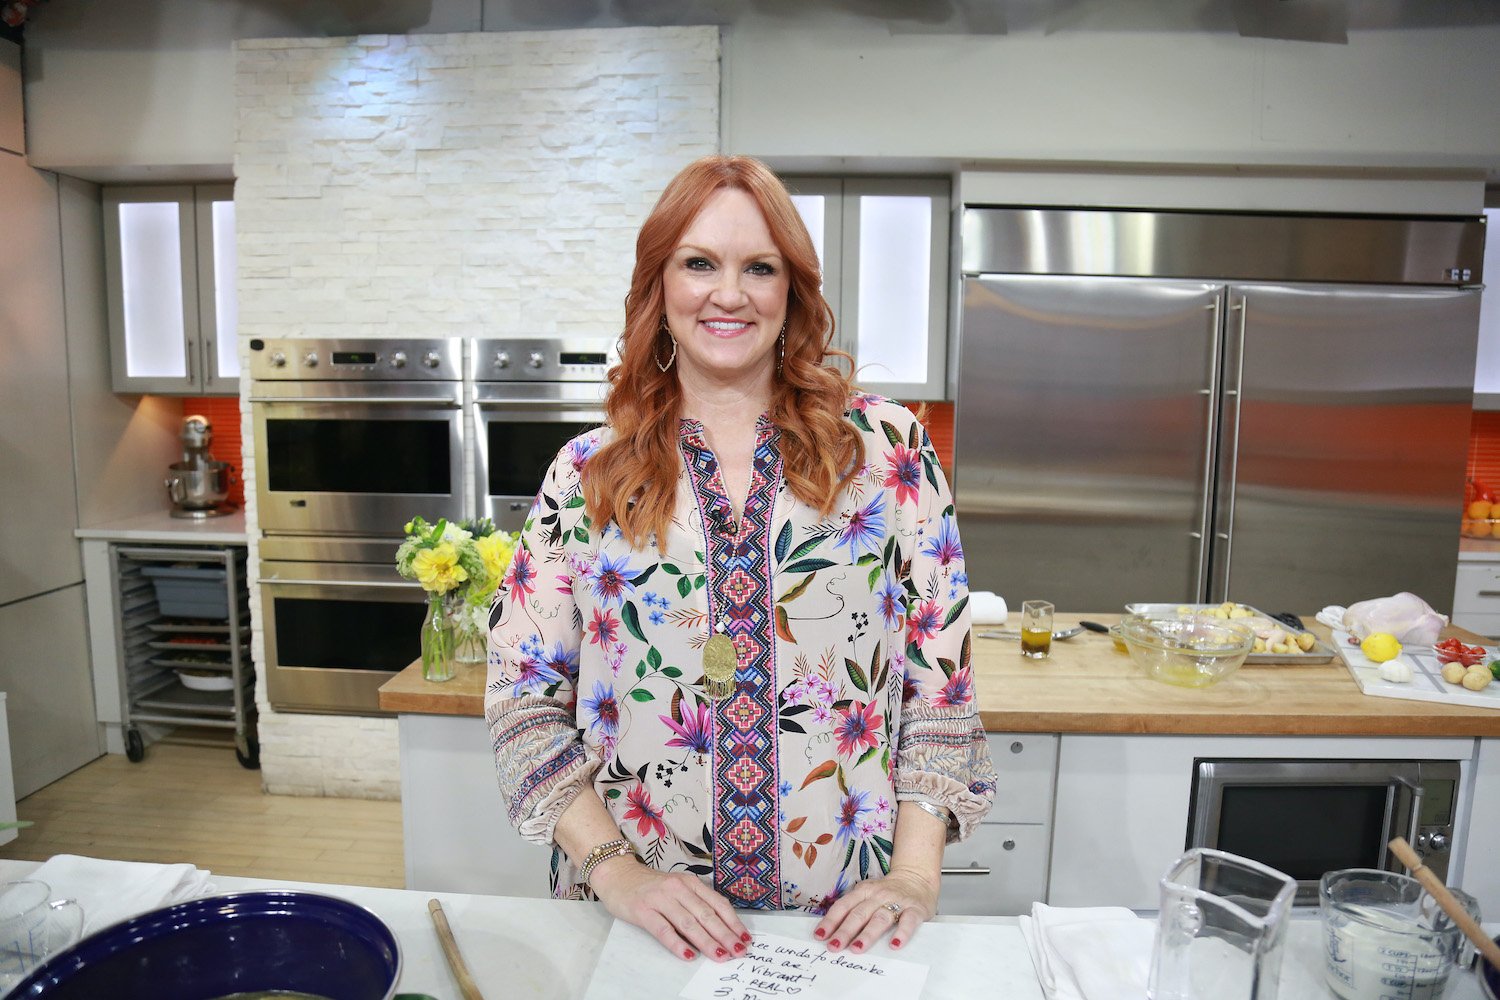 'The Pioneer Woman' Ree Drummond poses during a cooking segment on the Today show in 2019.